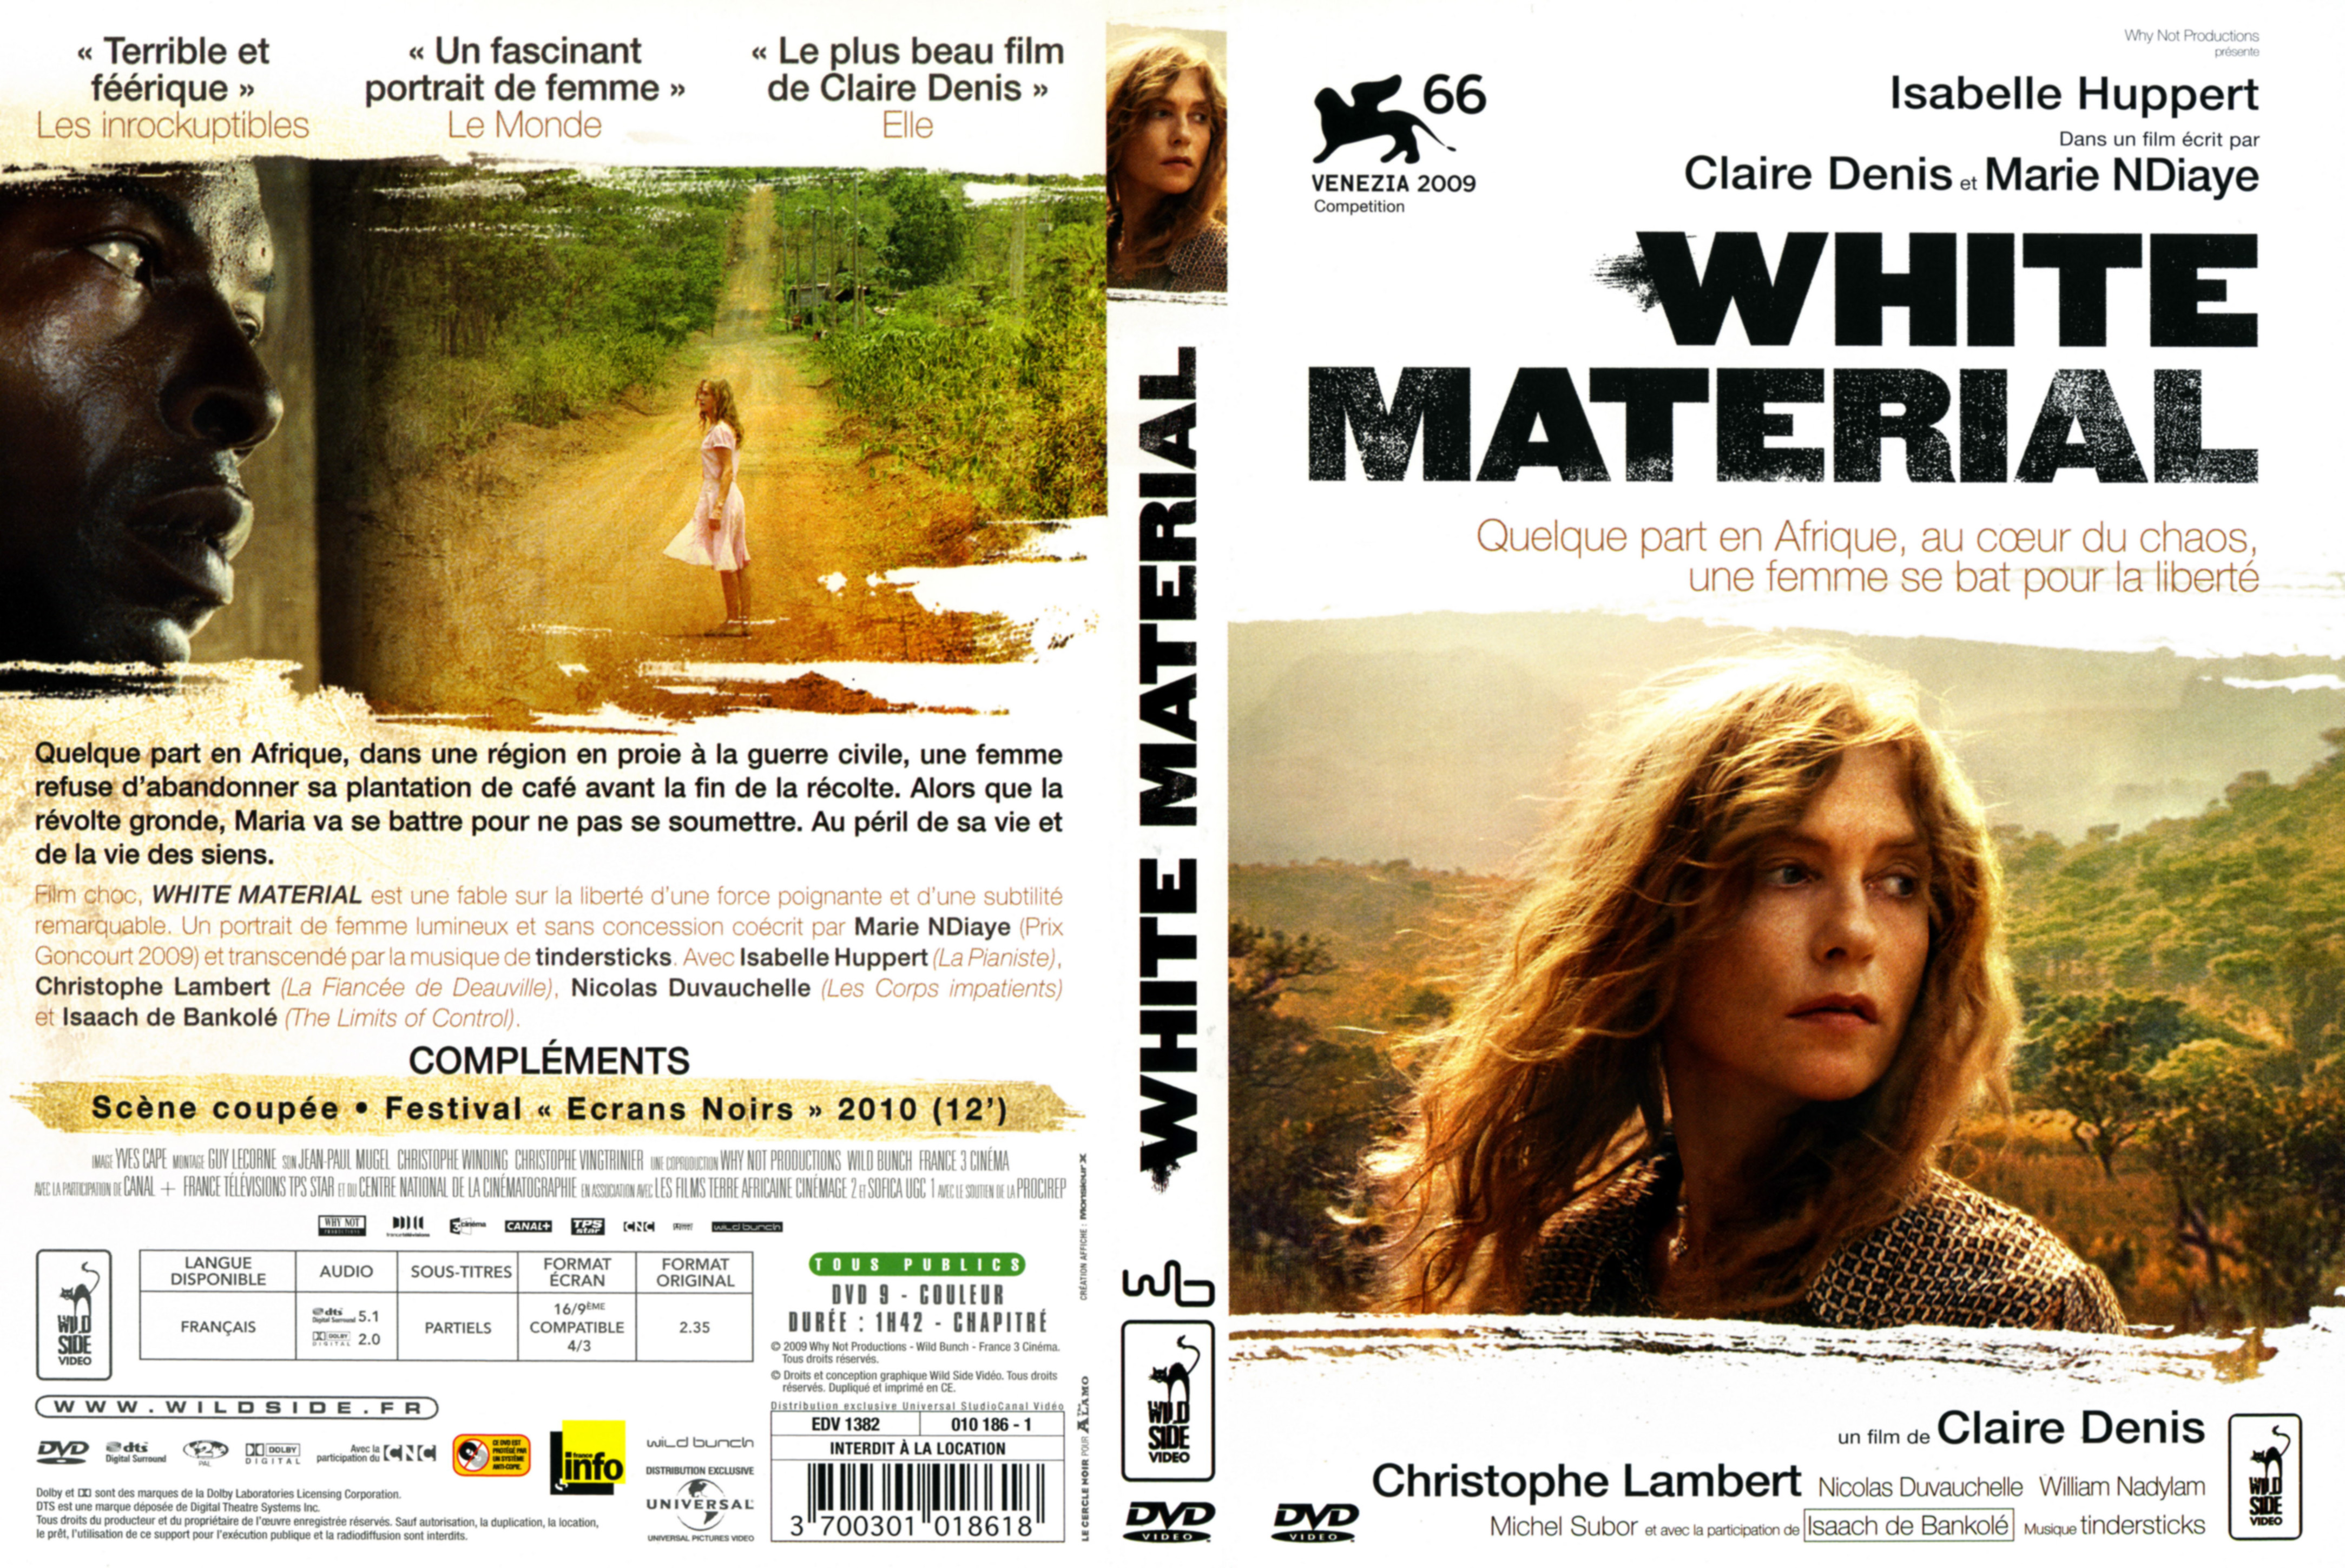 Jaquette DVD White material